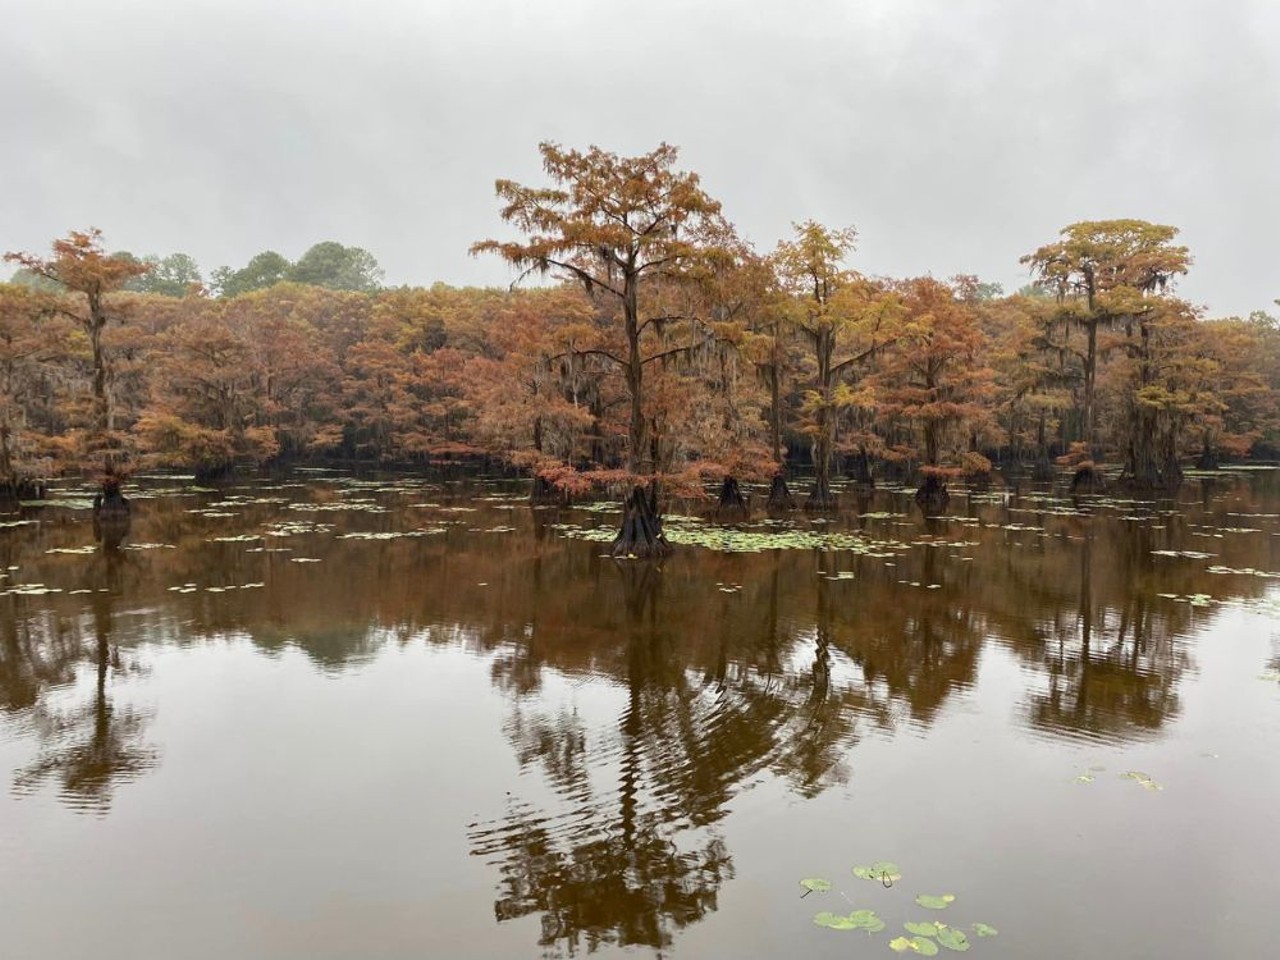 Caddo Lake State Park
245 Park Rd 2, Karnack, (903) 679-3351, tpwd.texas.gov
Located in East Texas, Caddo Lake is all about wildlife and the natural lake. Camp, fish, paddle, hike and go boating here — whatever you may wish. All activities aside, the serene beauty of this park is reason enough to travel to this park.